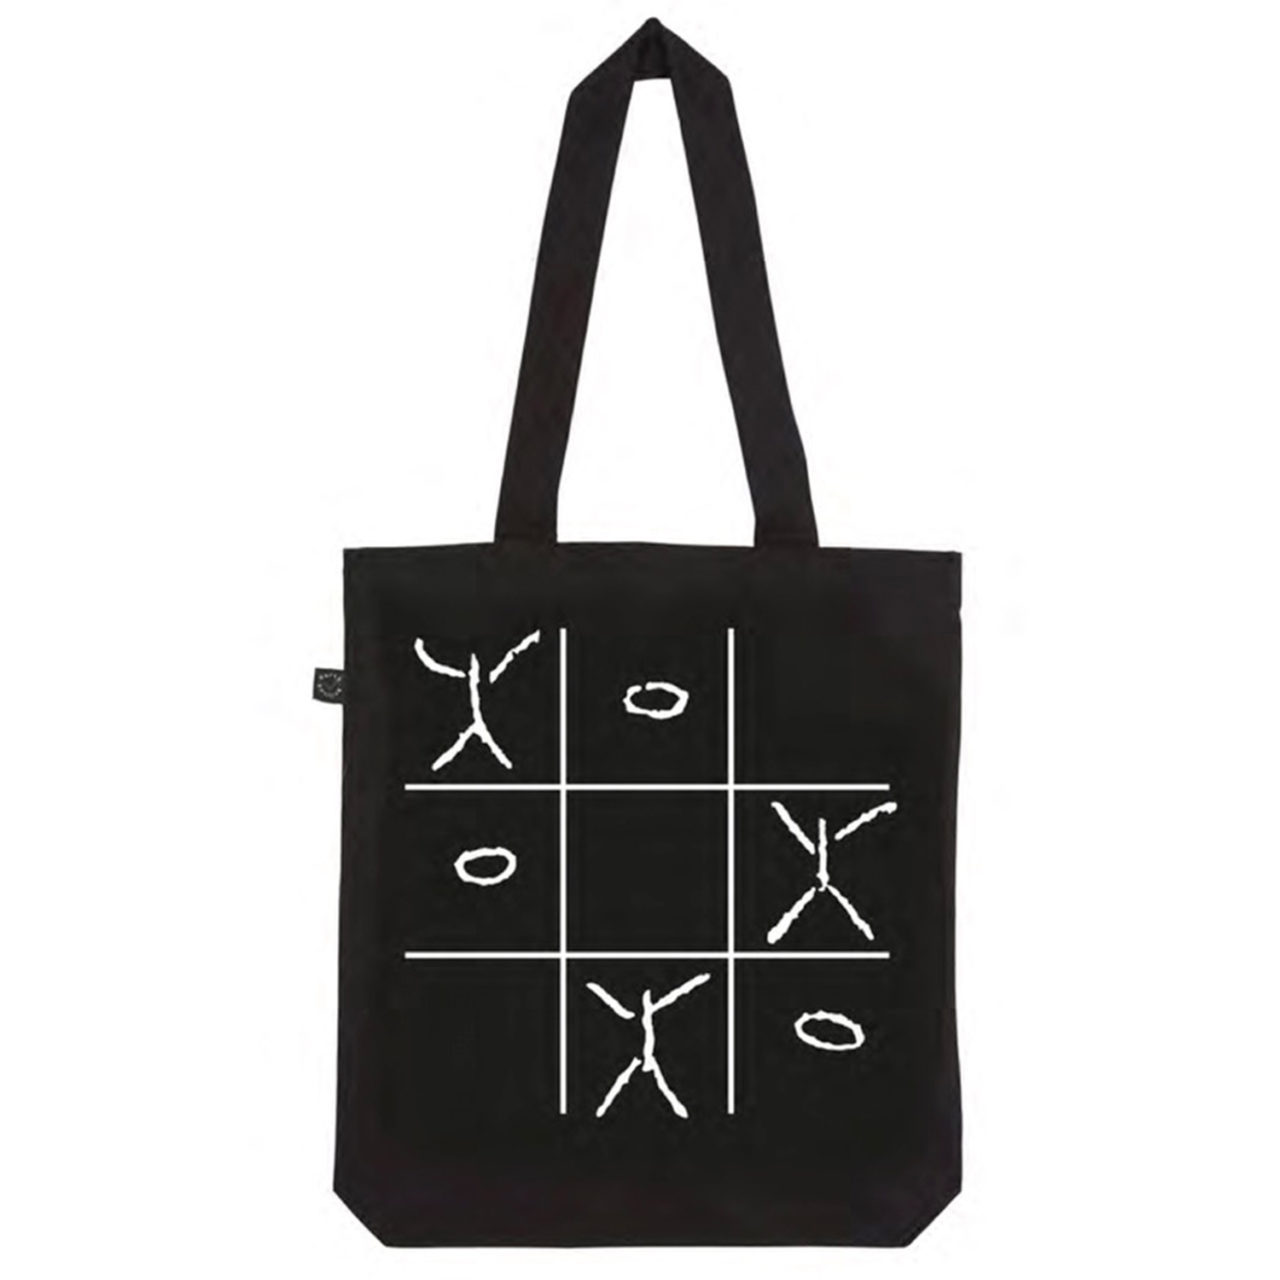 THE YOUNG GODS - In C Tote Bag